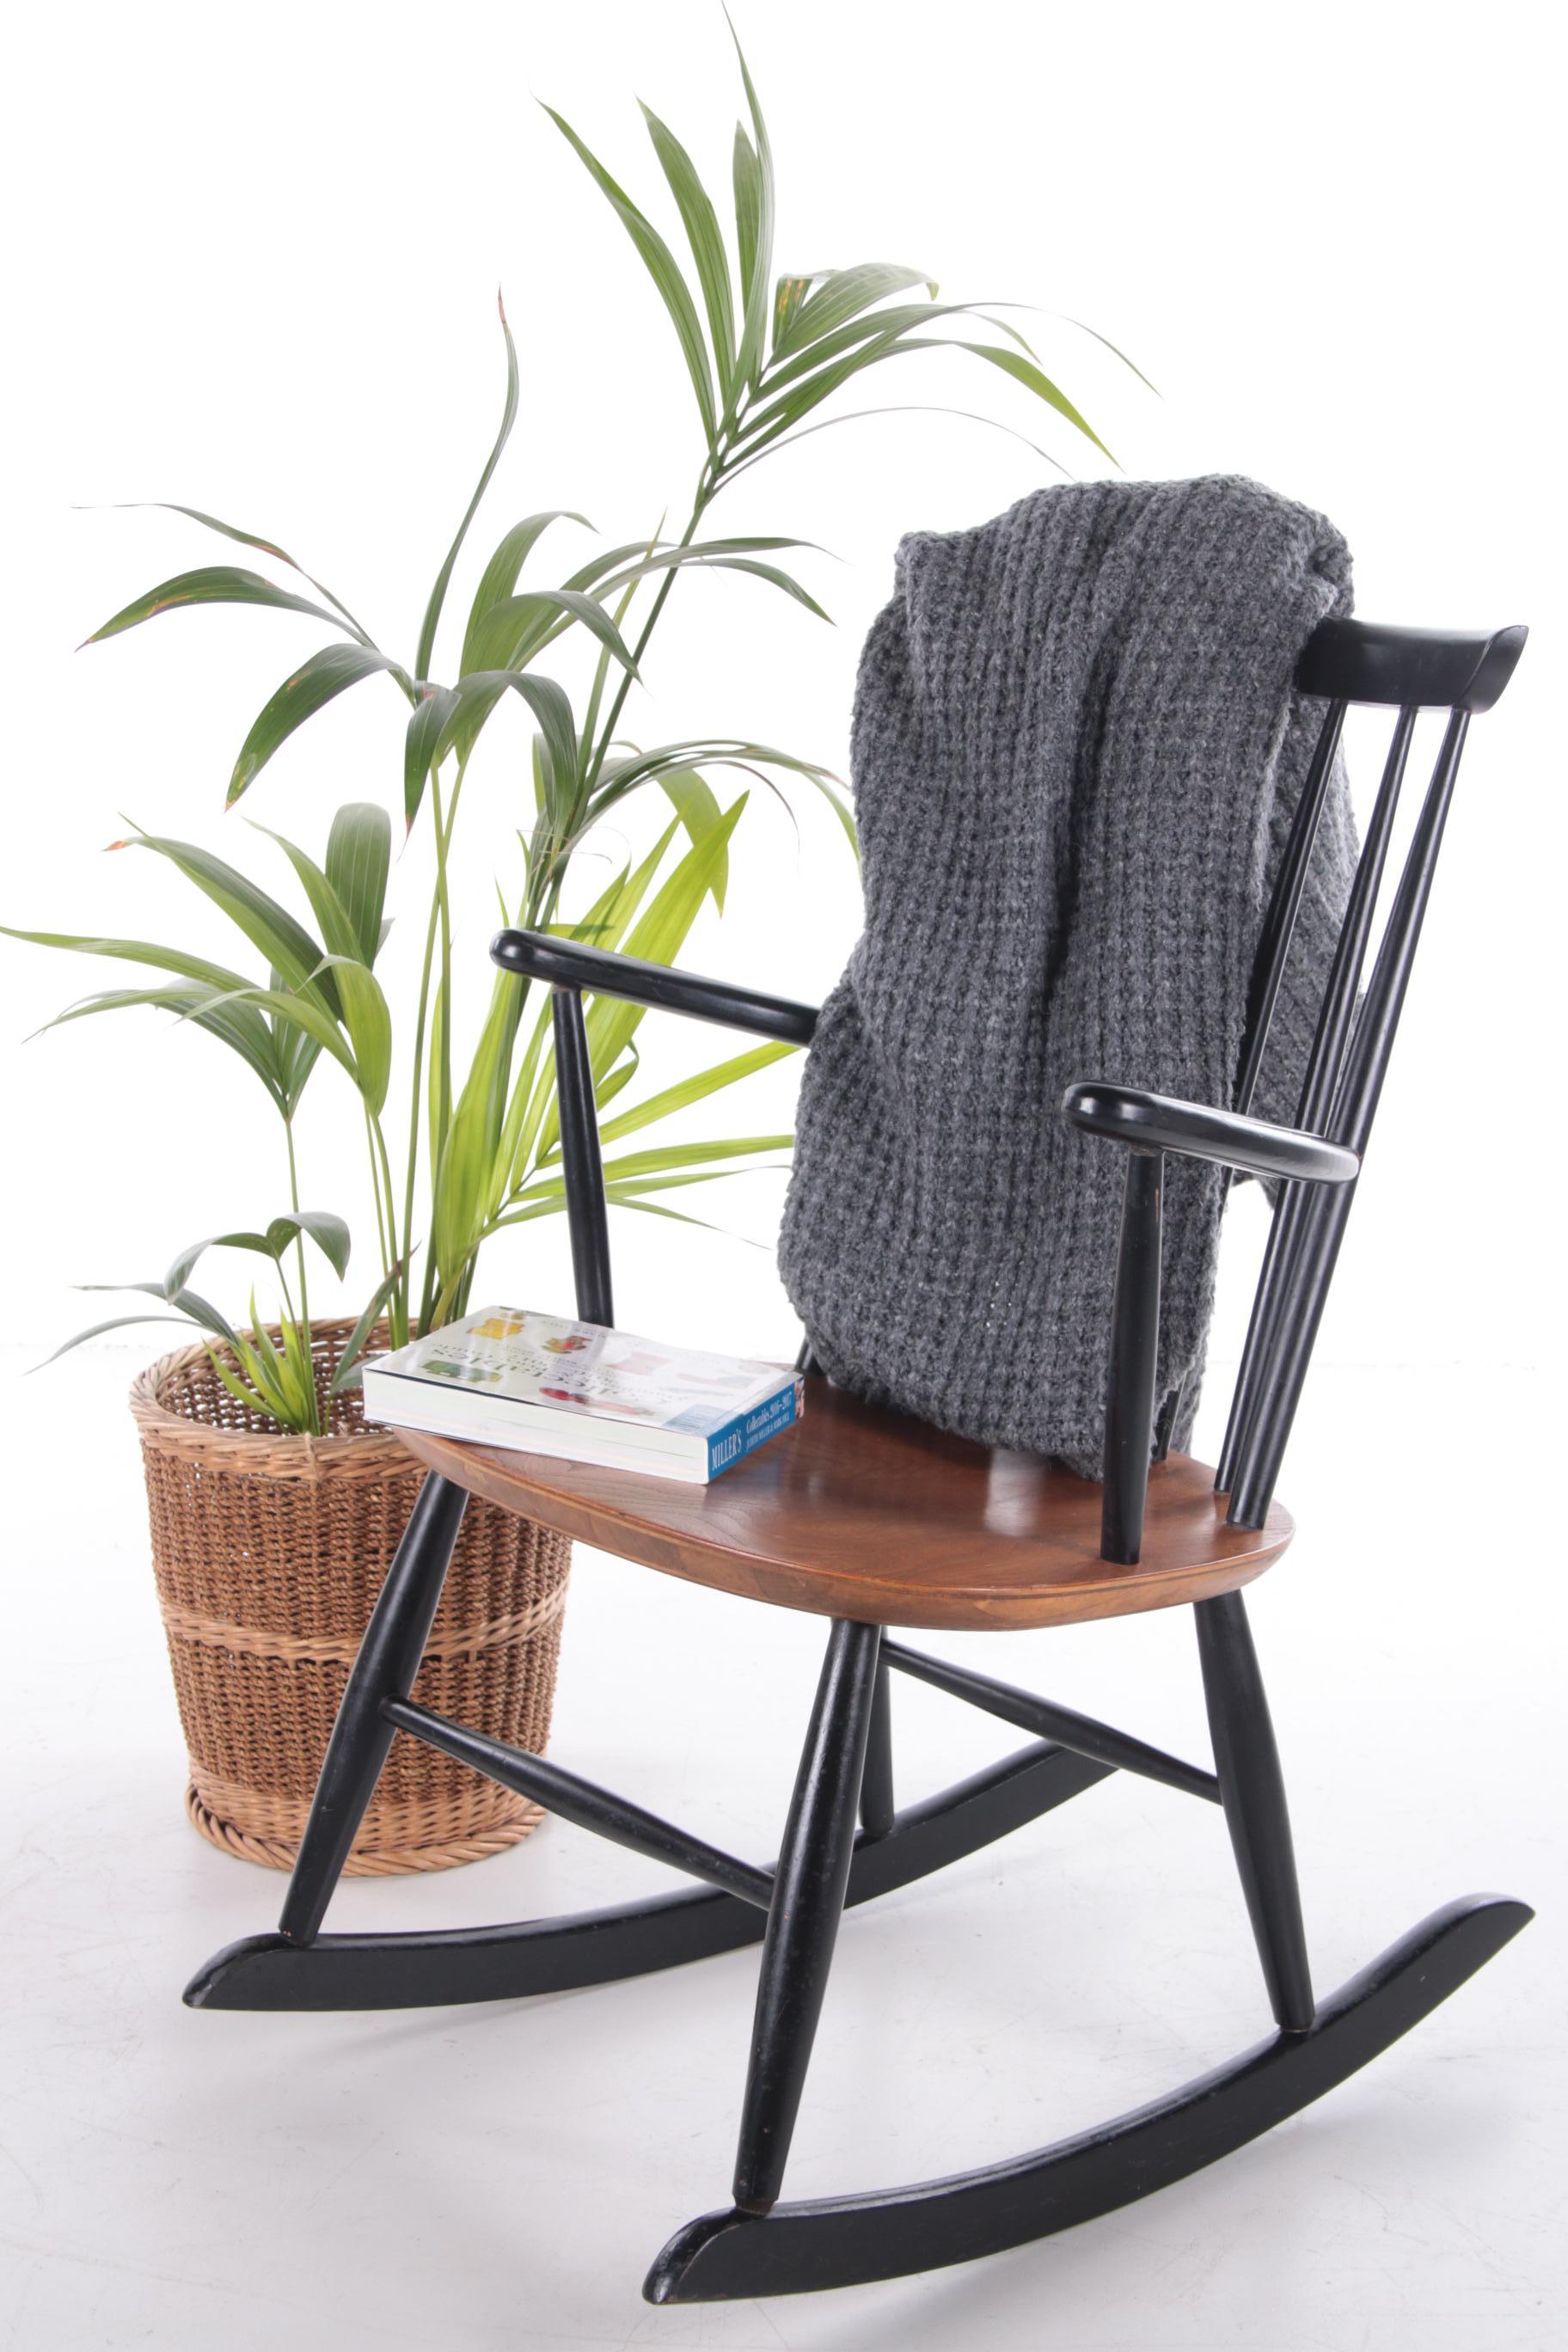 Rocking chair by Hagafors Stolfabrik Sweden, by Roland Rainer, from the 1960s. 

The chair is made of solid wood and painted black. With a beautiful wooden seat.

This fits nicely with a Bohemian style and then wonderful with a book.

The